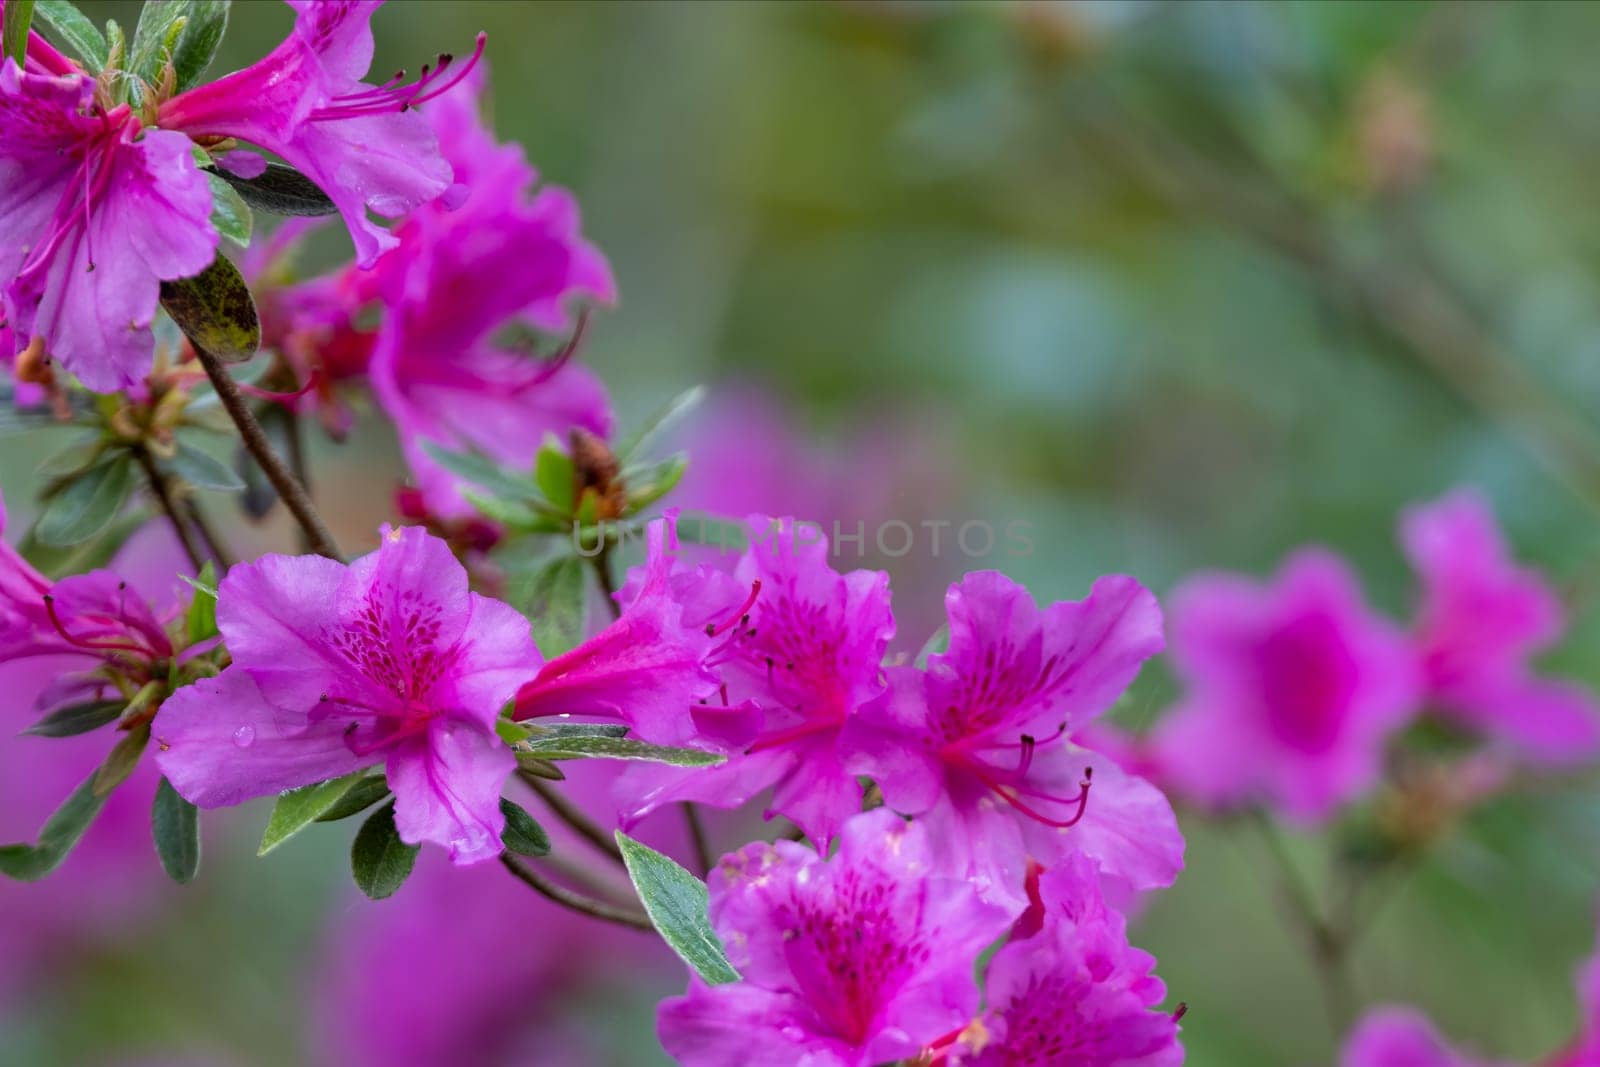 Spring flowering tree with bright pink blossoms and shallow depth of field, background blur green background by bRollGO